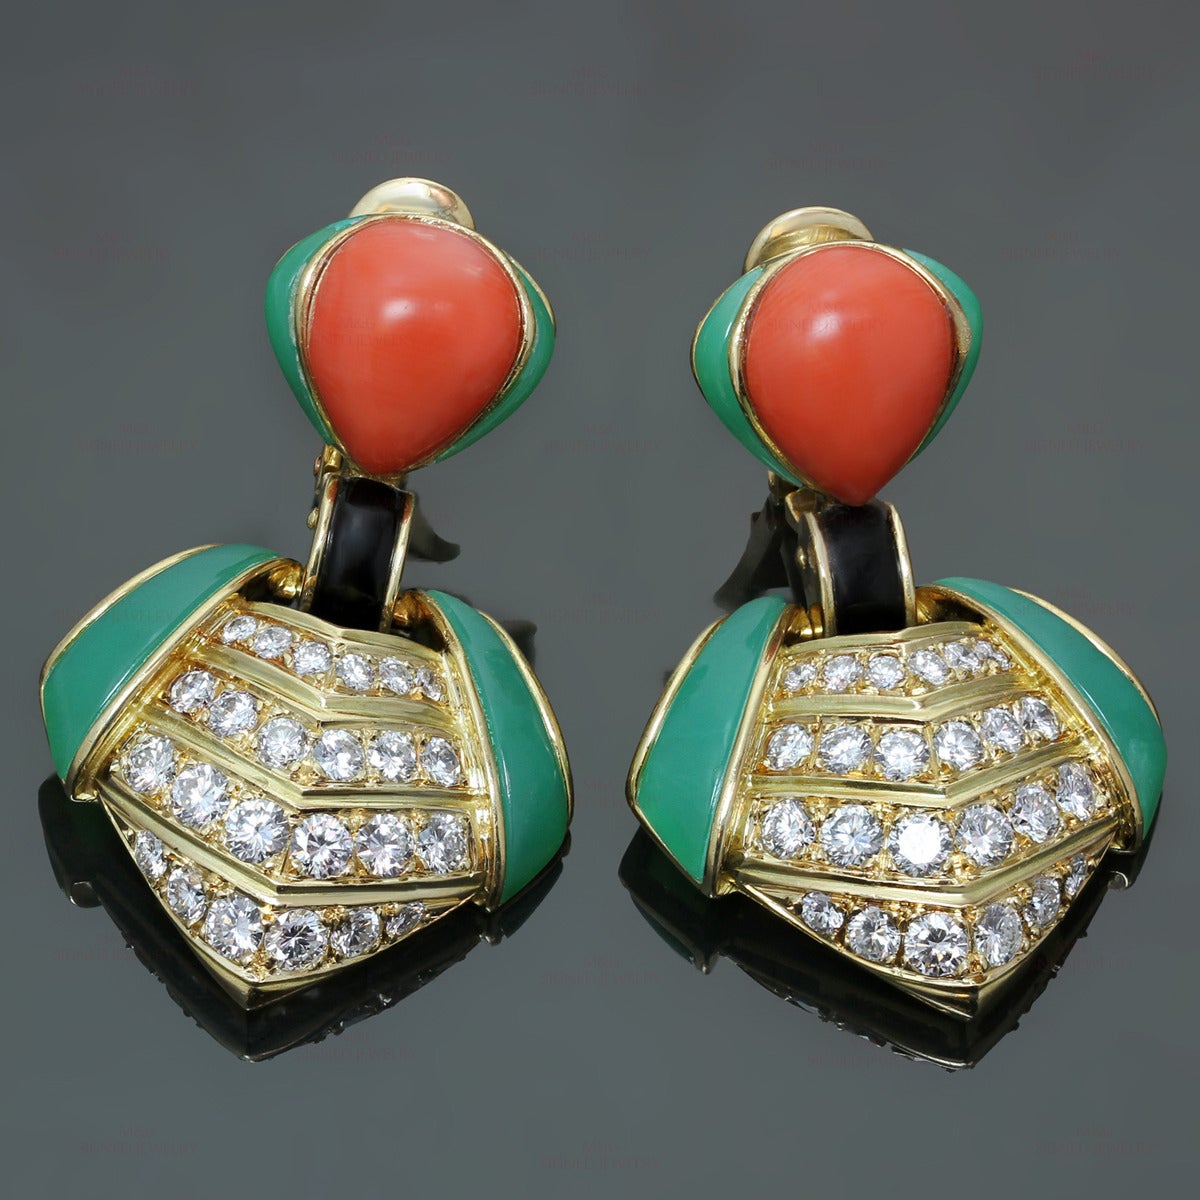 These magnificent Van Cleef & Arpels clip-on earrings are made in 18k yellow gold and feature geometric drops set with 4 rows of brilliant-cut round E-F VVS2-VS1 diamonds of an estimated 3.0 carats, green chrysoprase side stones, red coral, and